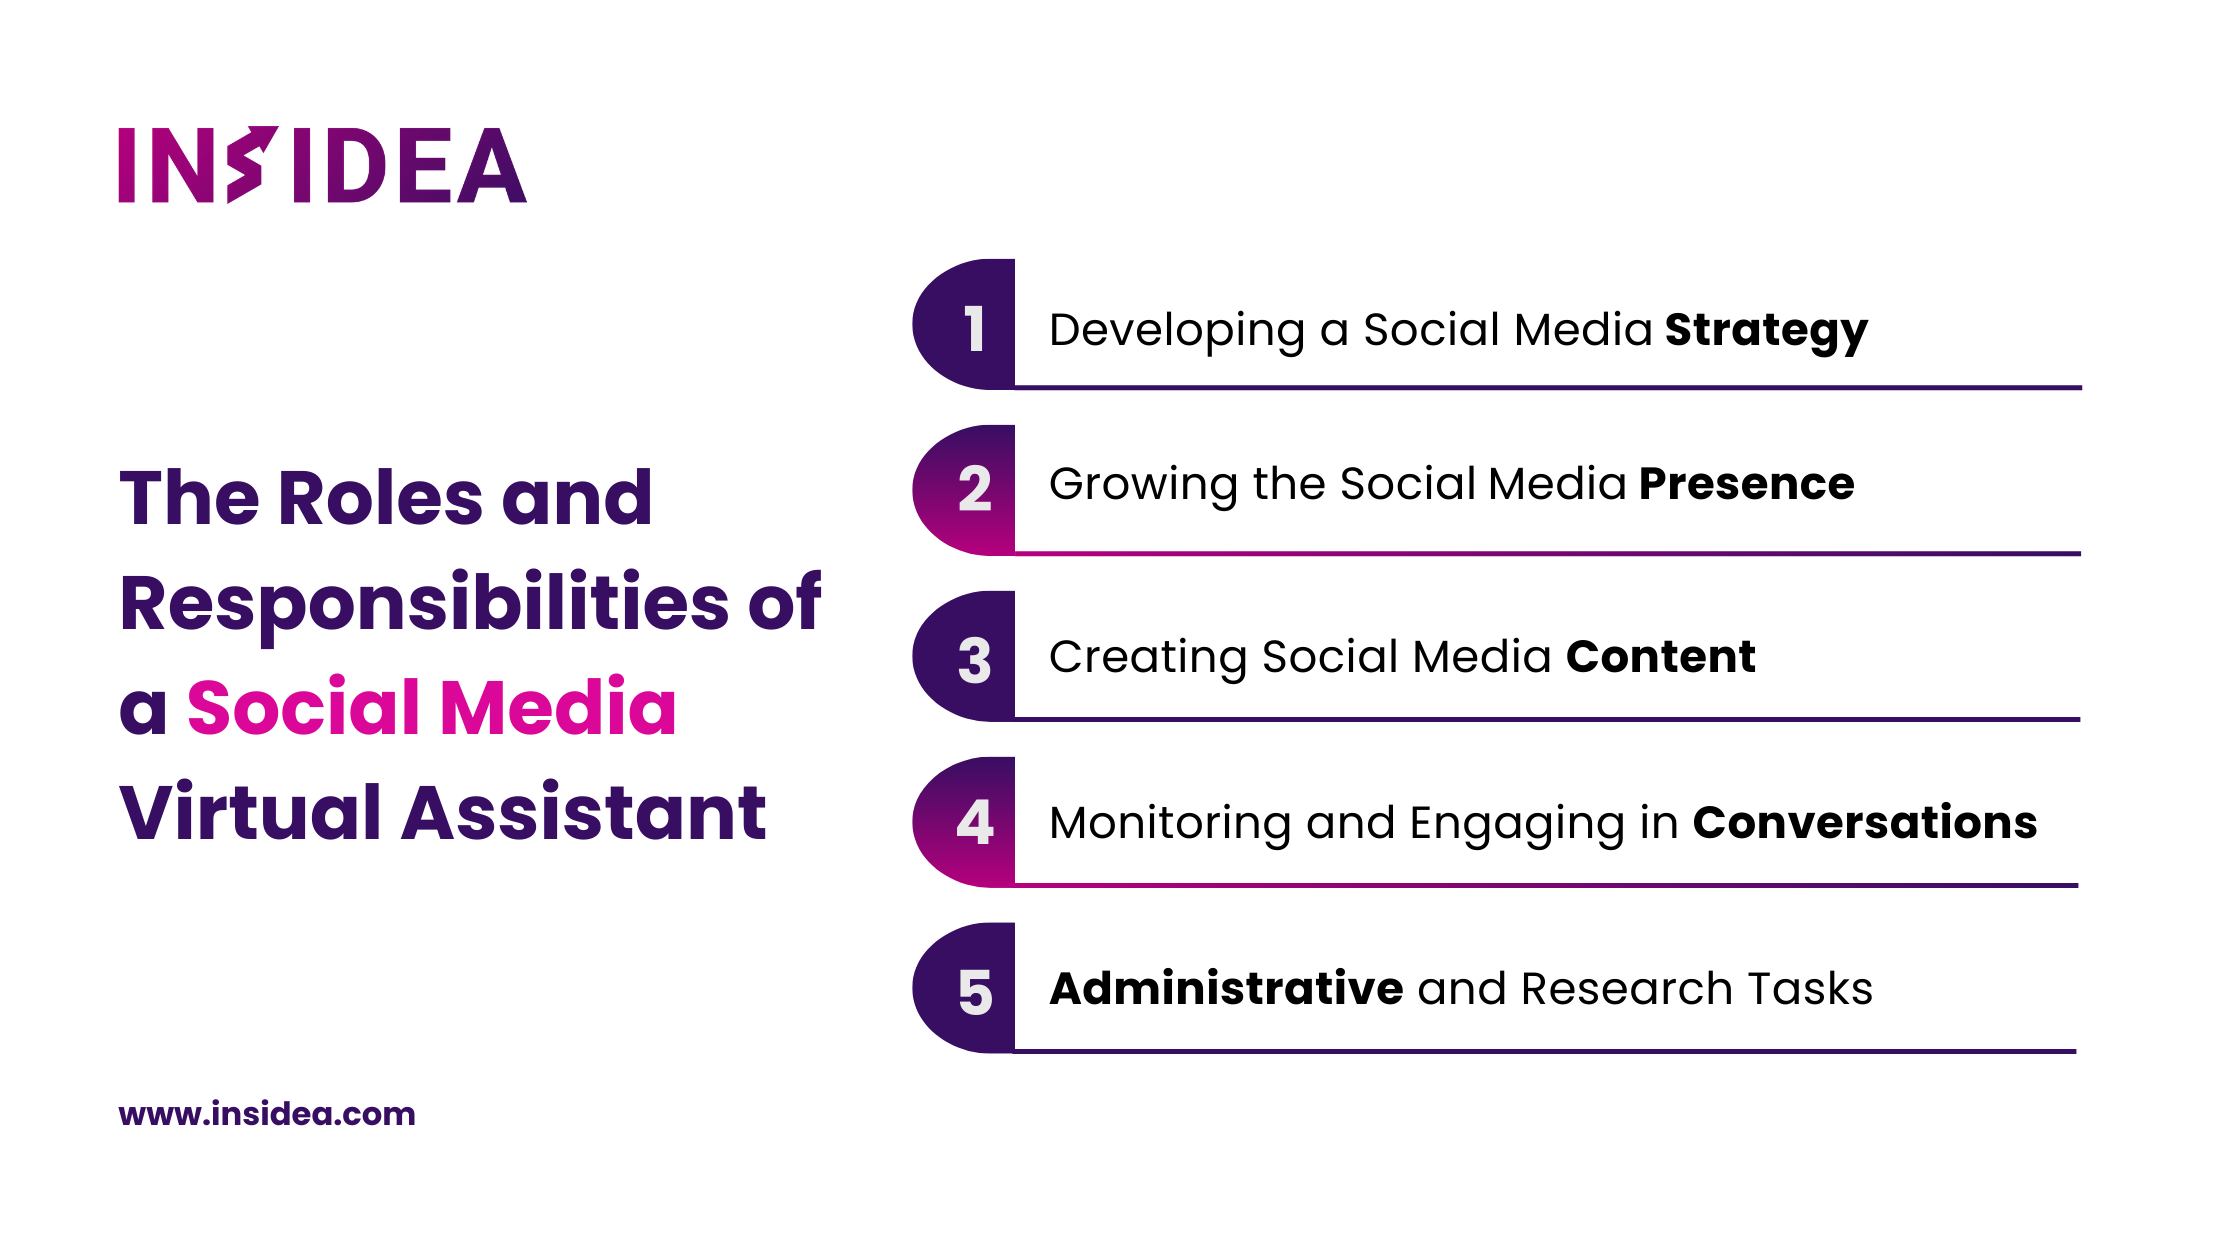 The Roles and Responsibilities of a Social Media Virtual Assistant